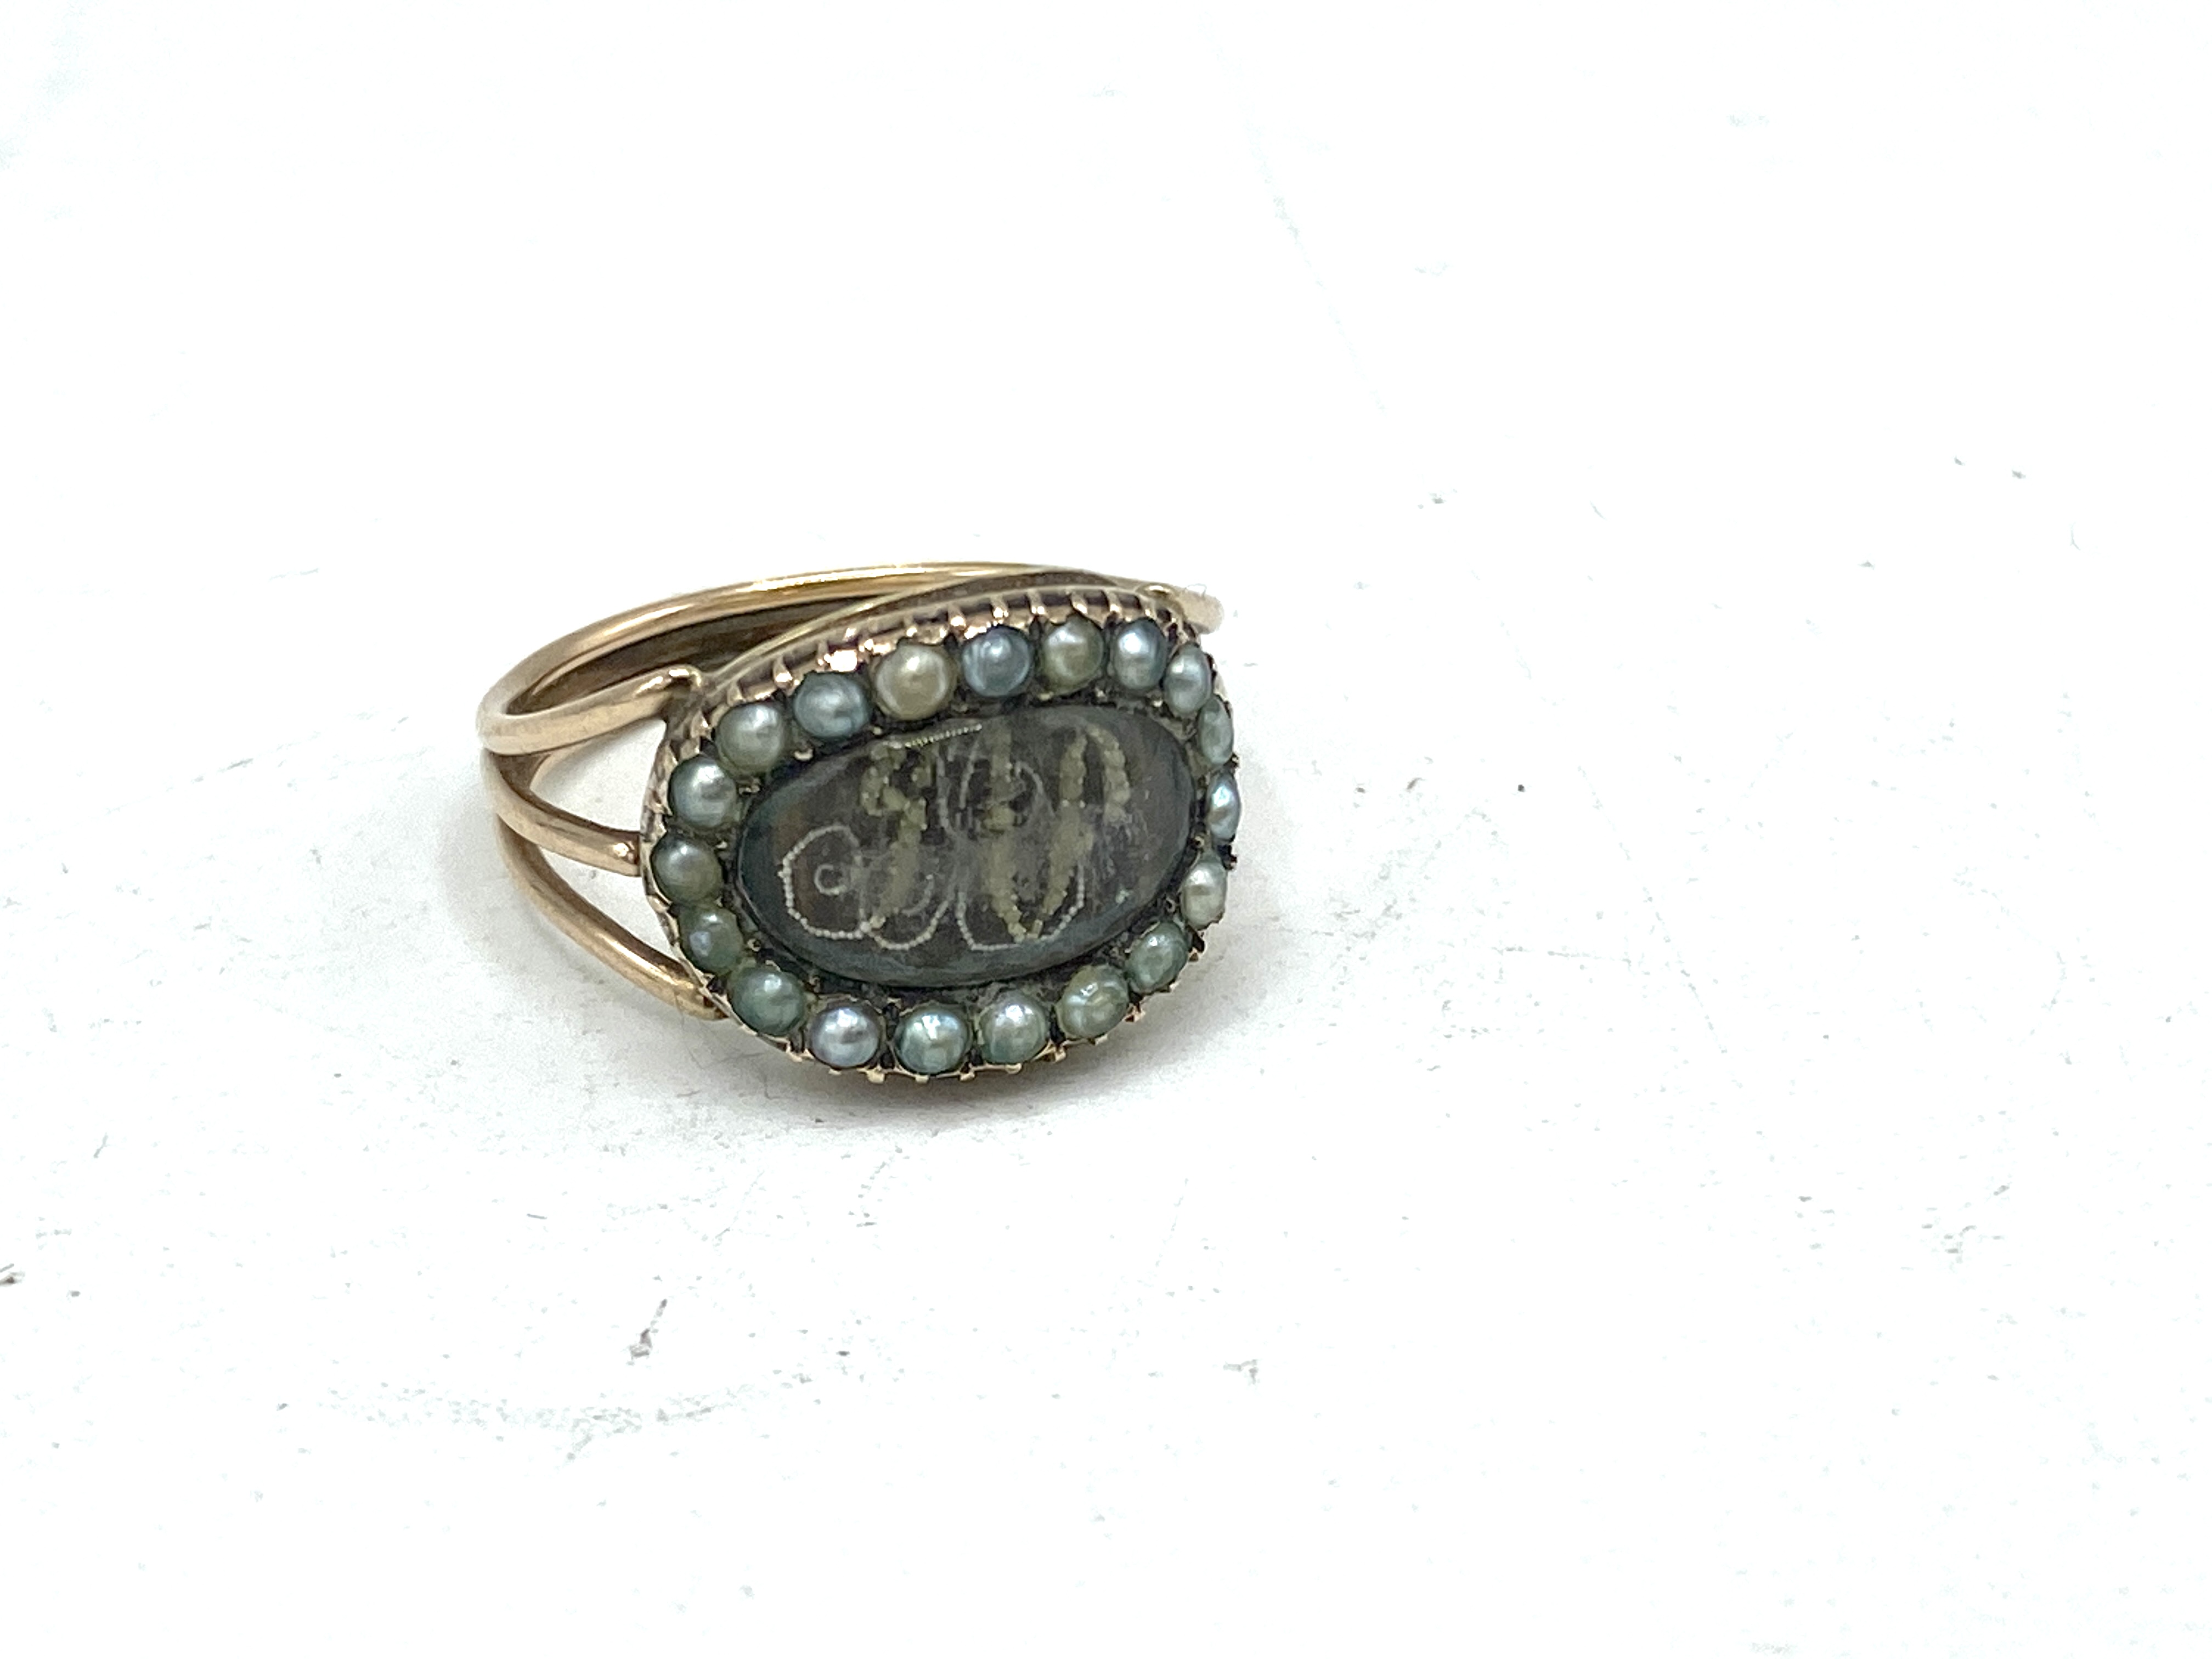 19th century emerald and pearl ring - Image 3 of 8